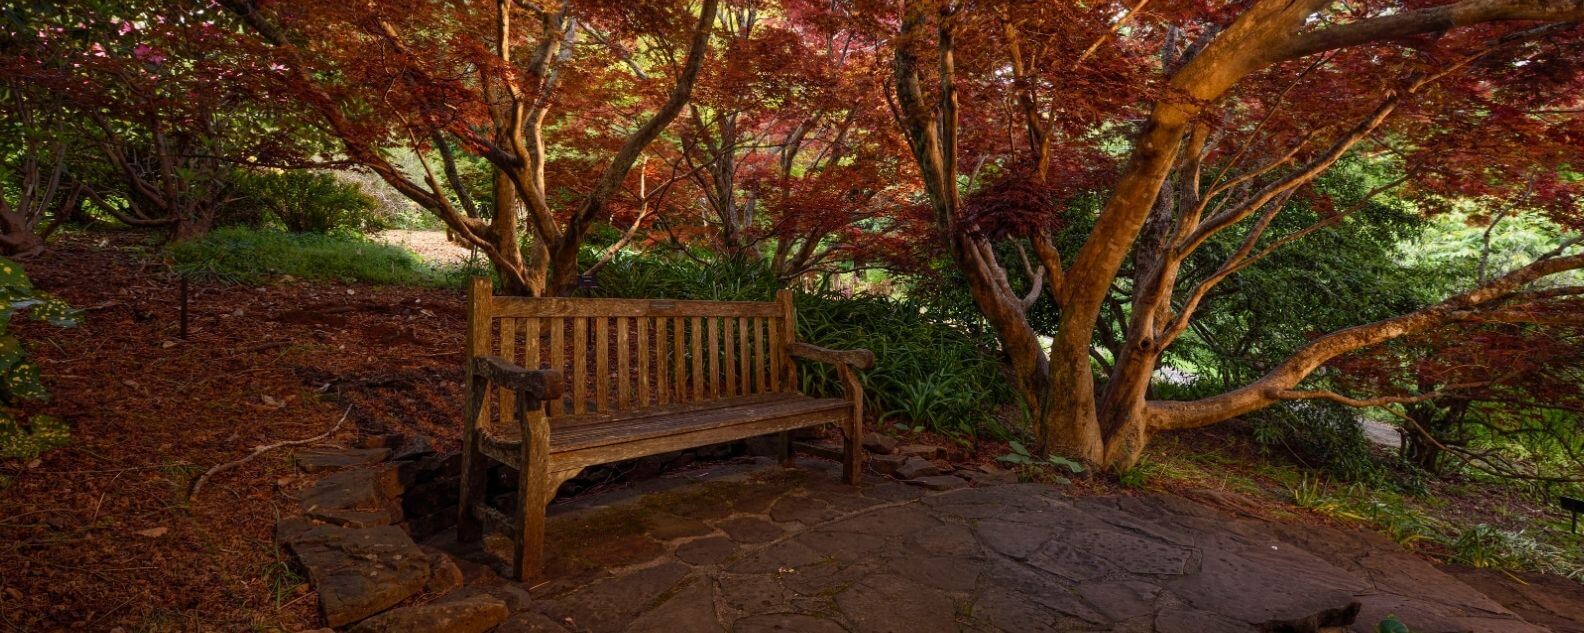 Bench surrounded by cool climate trees at the Blue Mountains Botanic Garden Mount Tomah